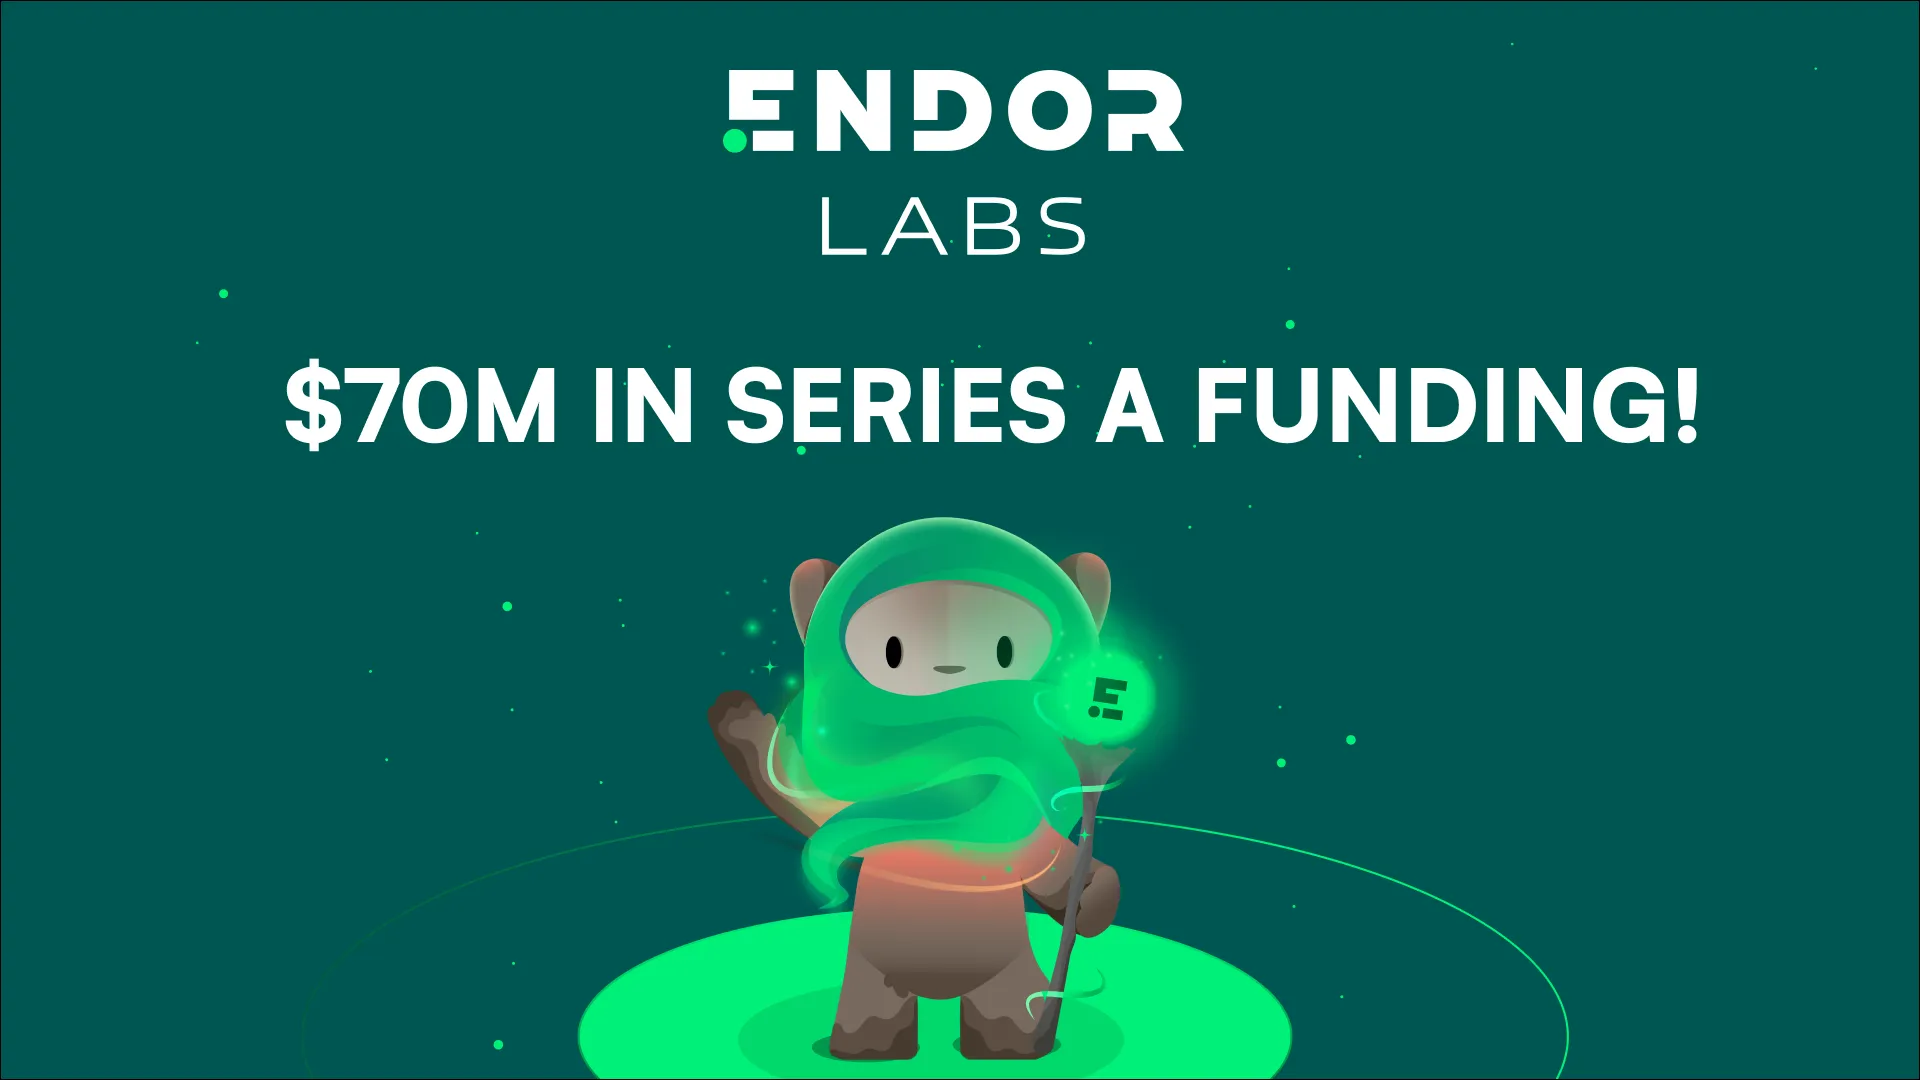 Endor Labs raises $70M in series A funding to reform application security